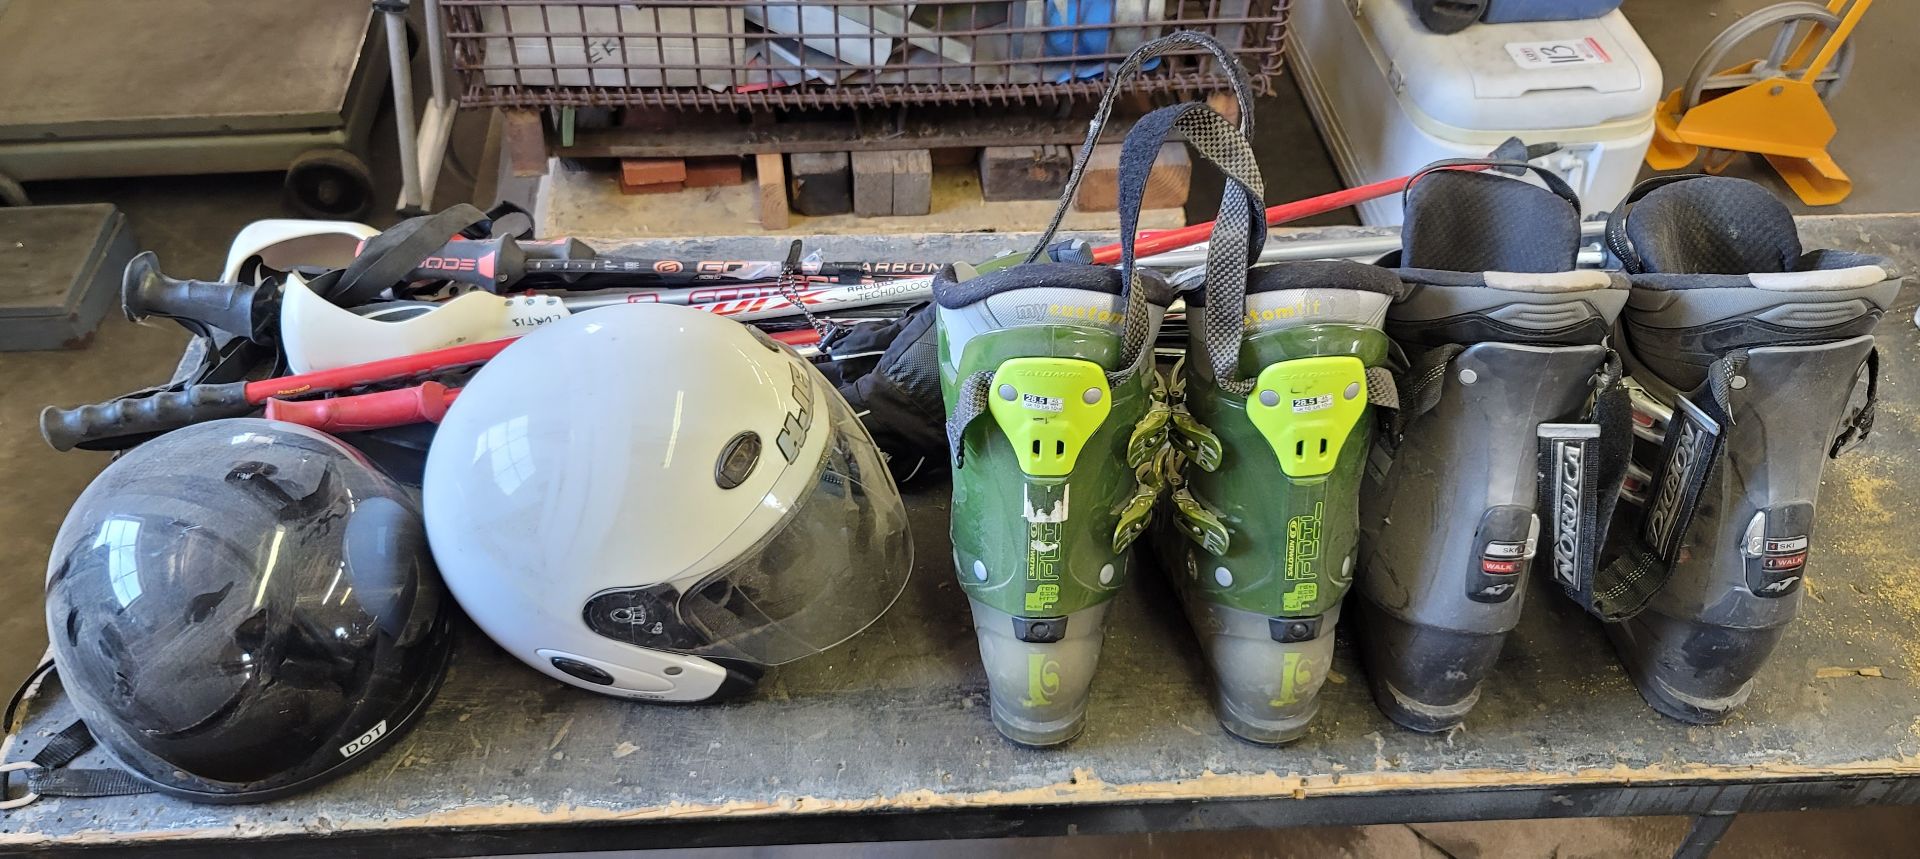 LOT - ASSORTED SKI BOOTS & POLES AND (2) MOTORCYCLE HELMETS - Image 2 of 2